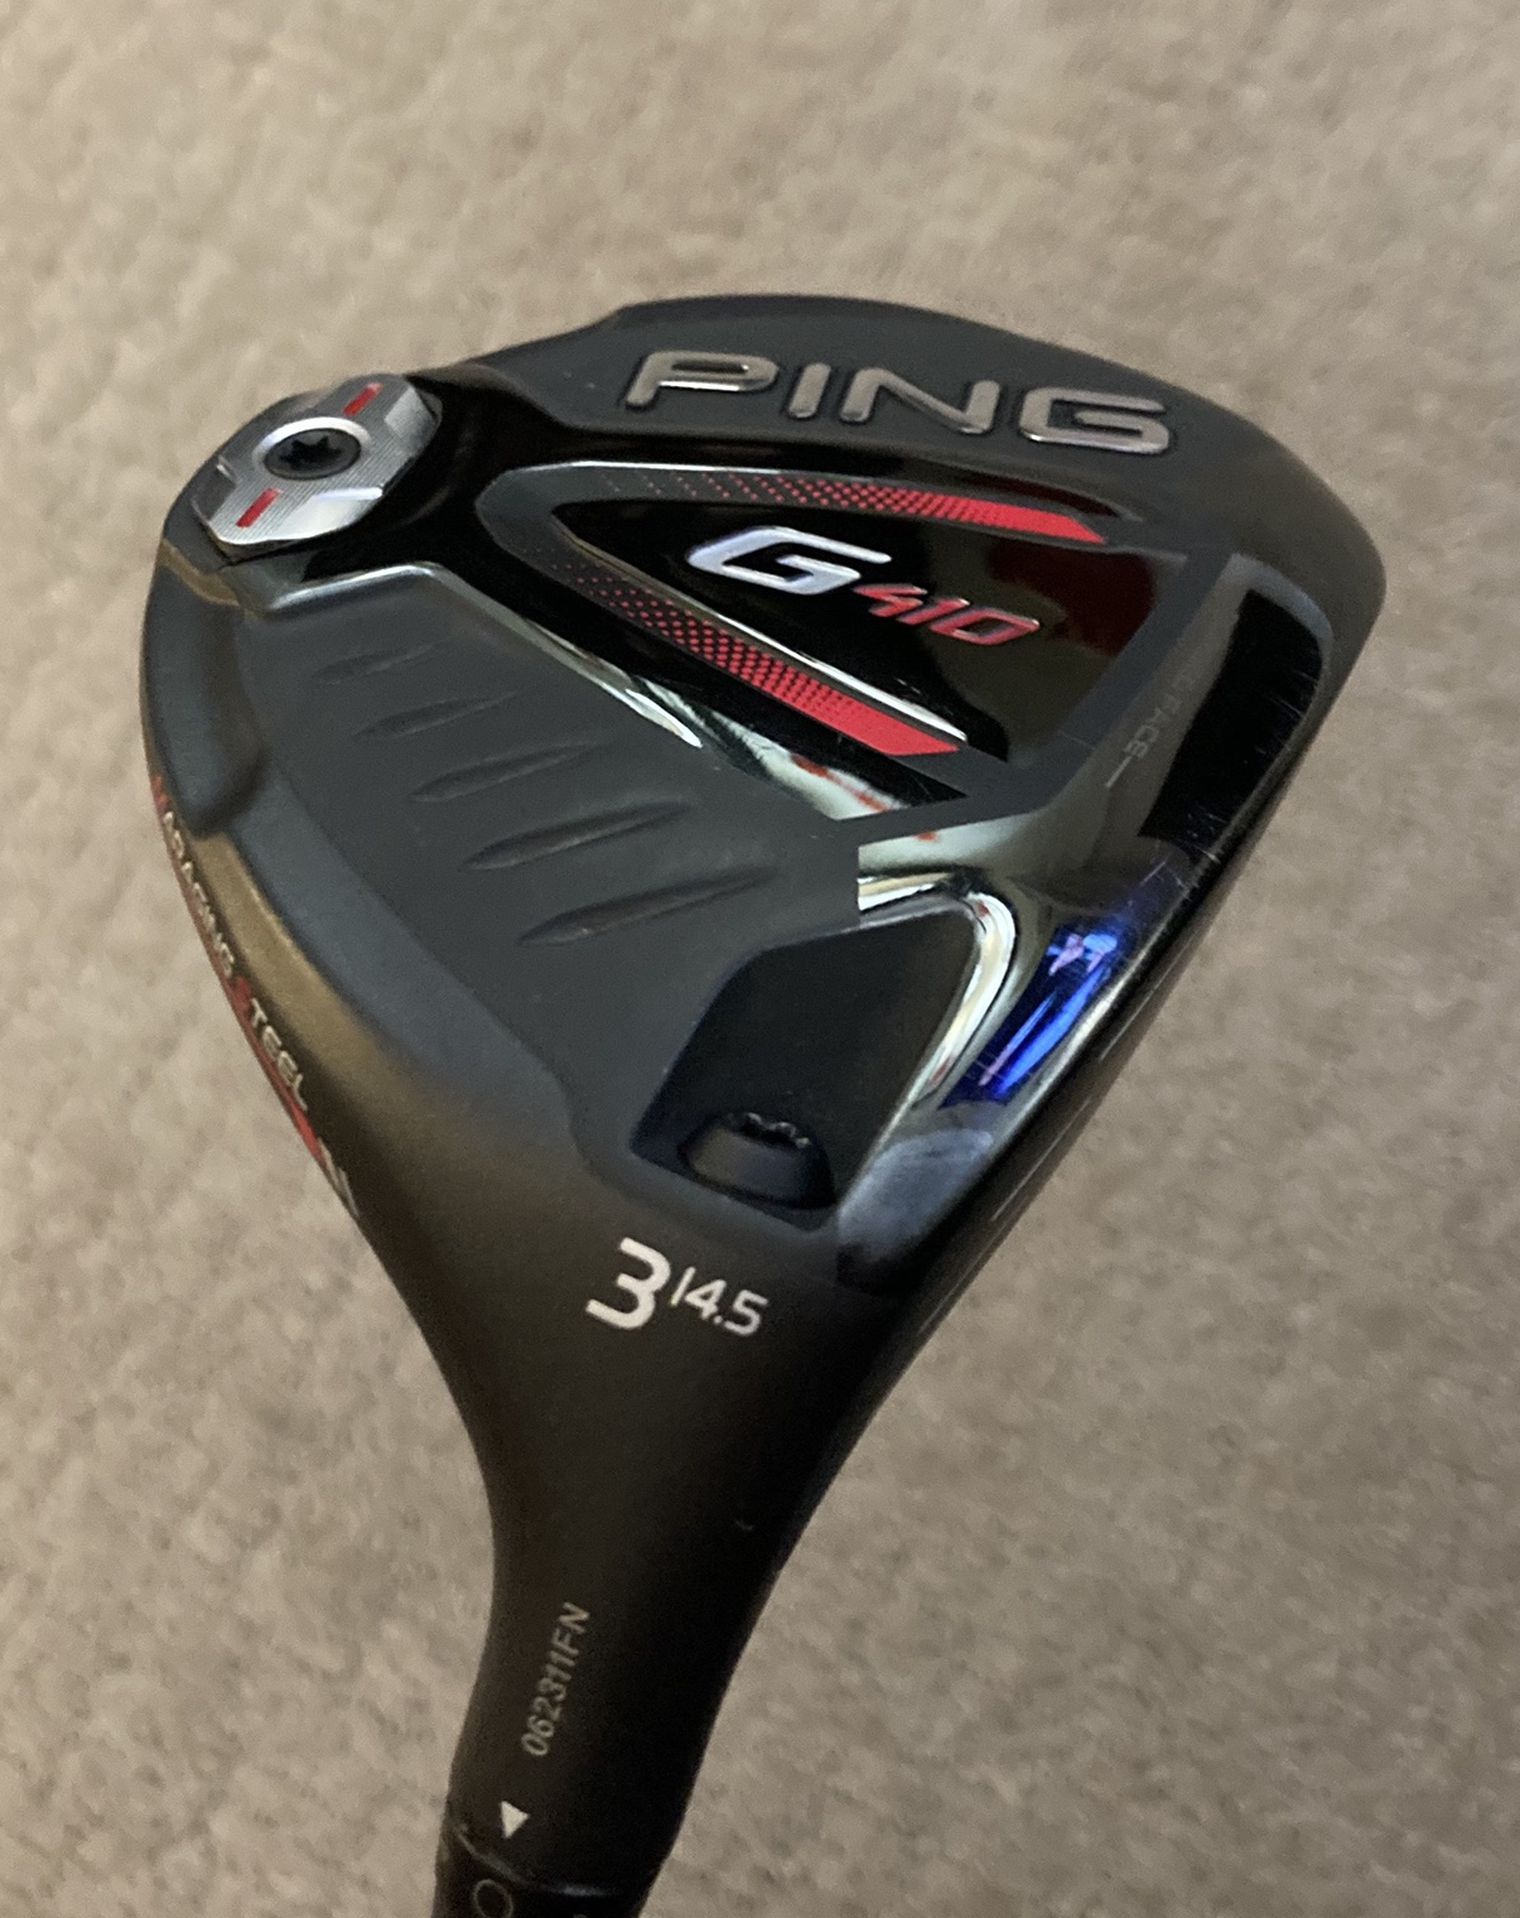 PING G410 3 Wood.... Ping Tour Pro S Shaft...Tour Velvet .60 Grip... This Club Is Practically Brand New..used For 2 rounds... Originally Cost $289.